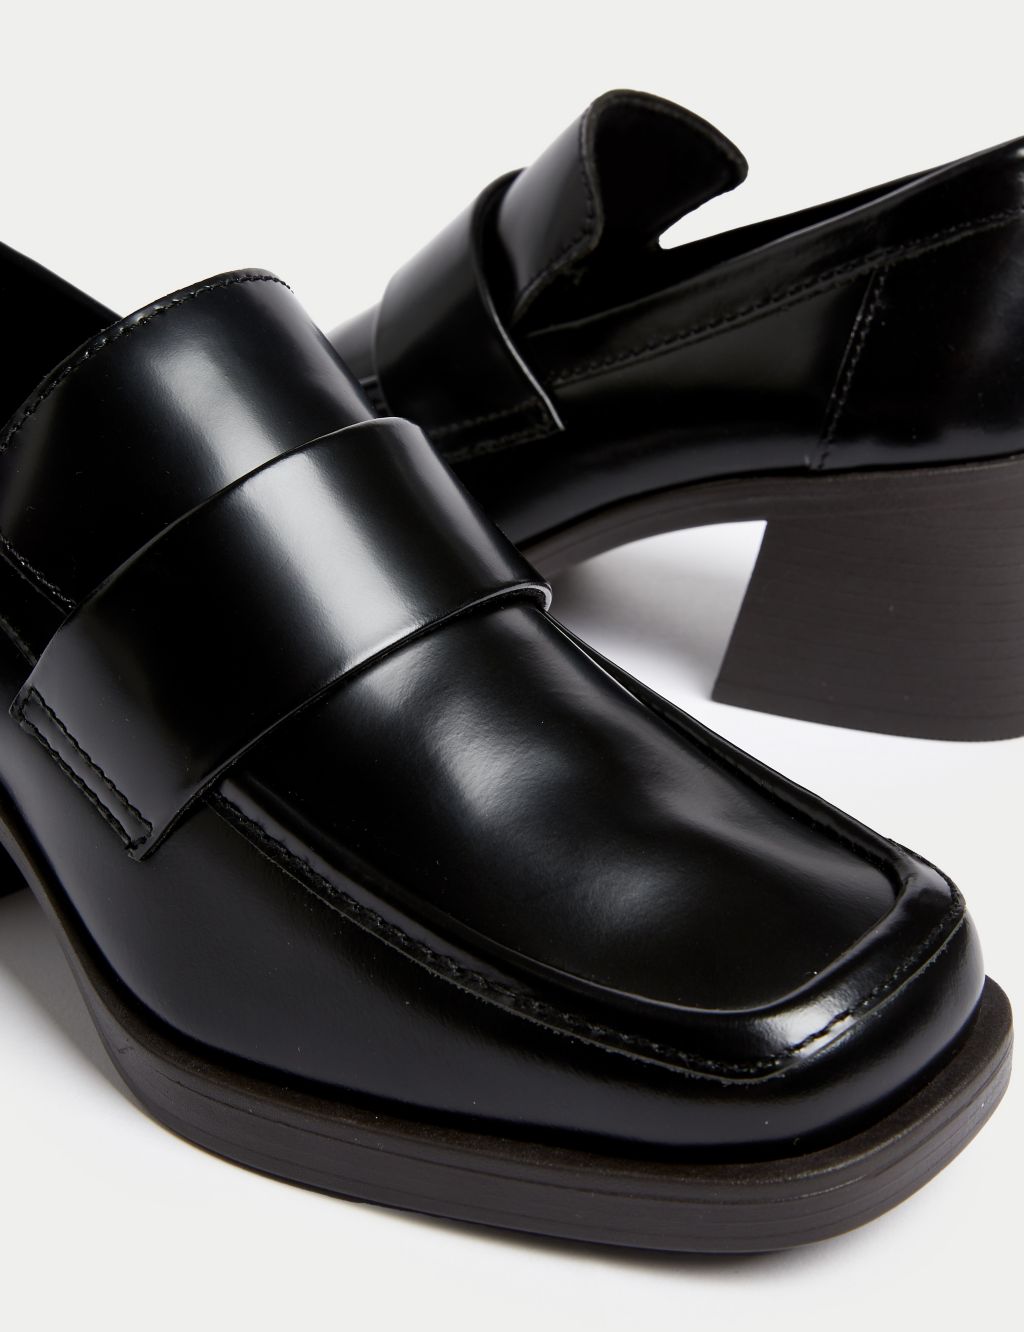 Leather Block Heel Square Toe Loafers image 3